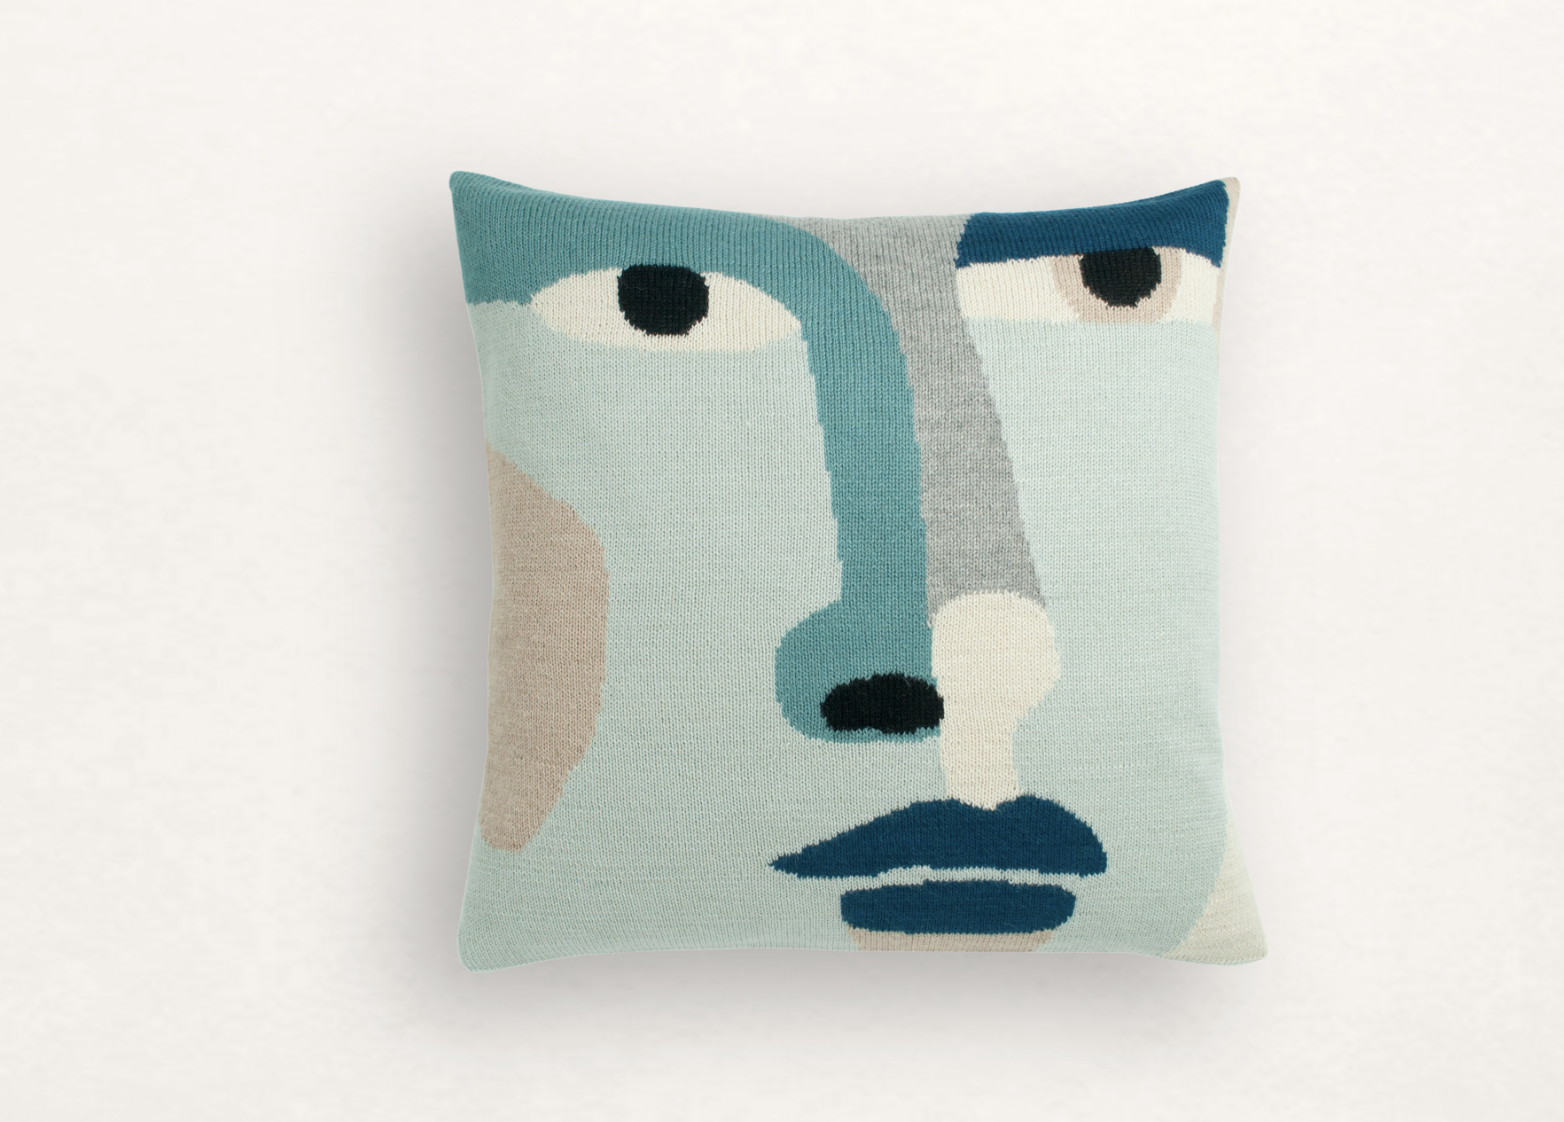  Eye-catching Look Now pillow case by  LUCKYBOYSUNDAY . 